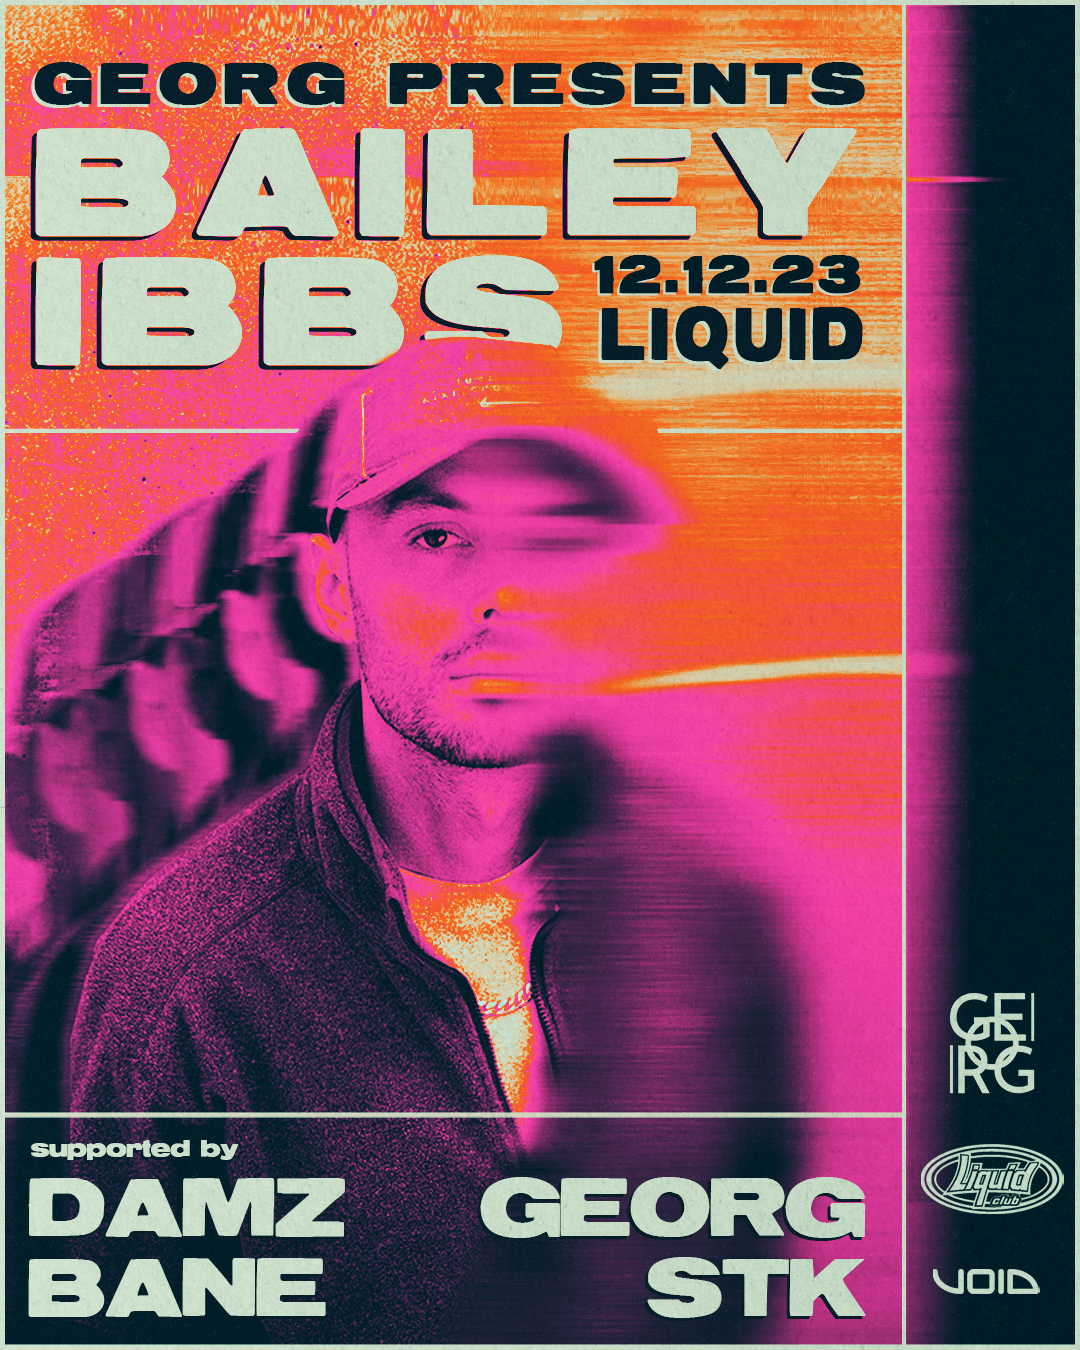 GEORG PRES :: BAILEY IBBS poster